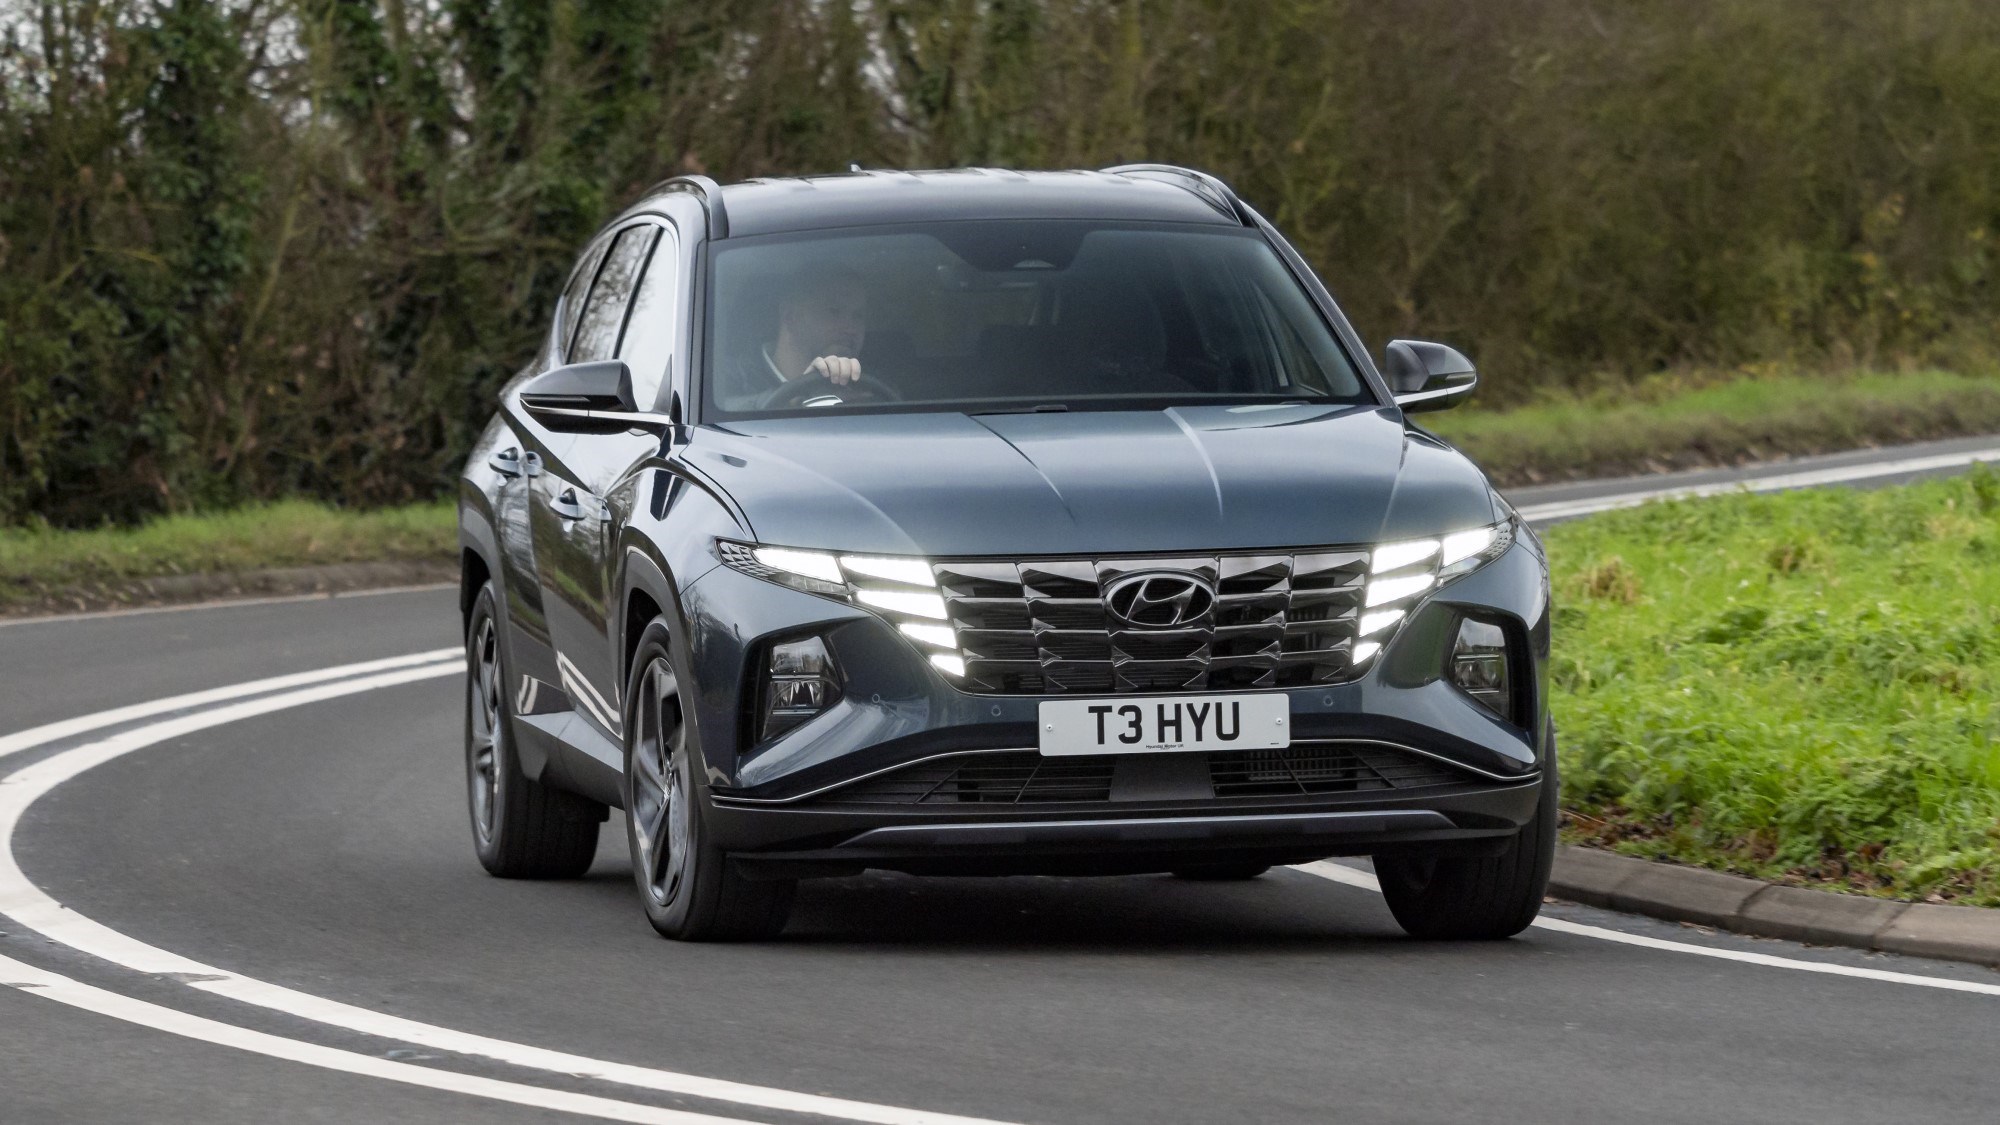 Peugeot 3008 review: the aesthete's mid-size SUV